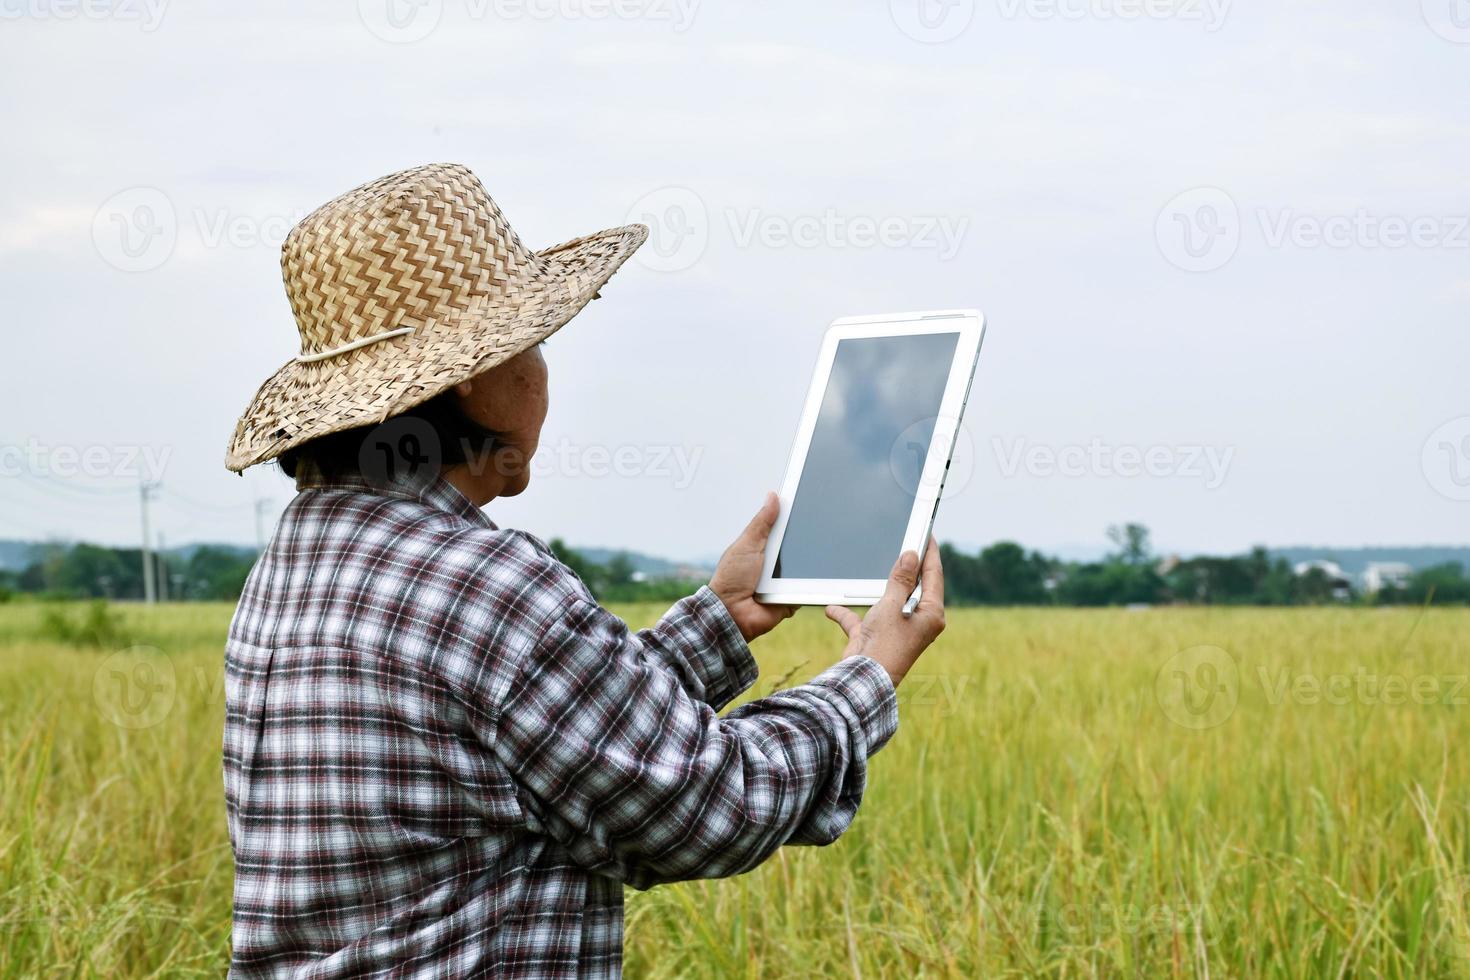 Portrait of asian senior elderly farmer who is holding smart phone and using it to connect to other people in the middle of rice field, smart devices in daily life of all general people concept. photo